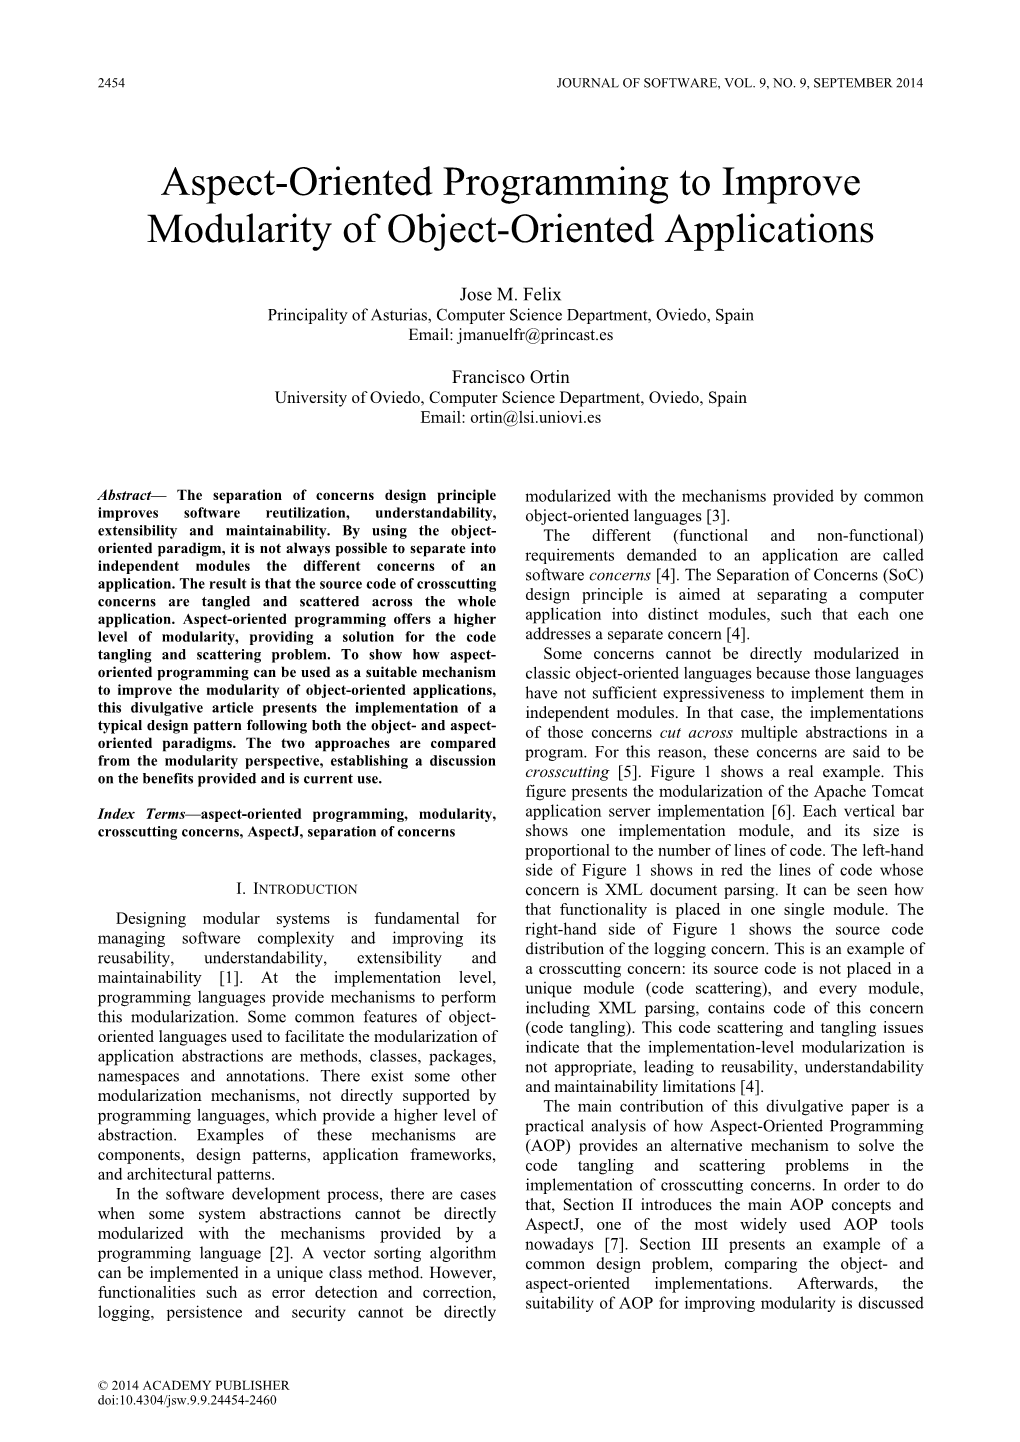 Aspect-Oriented Programming to Improve Modularity of Object-Oriented Applications